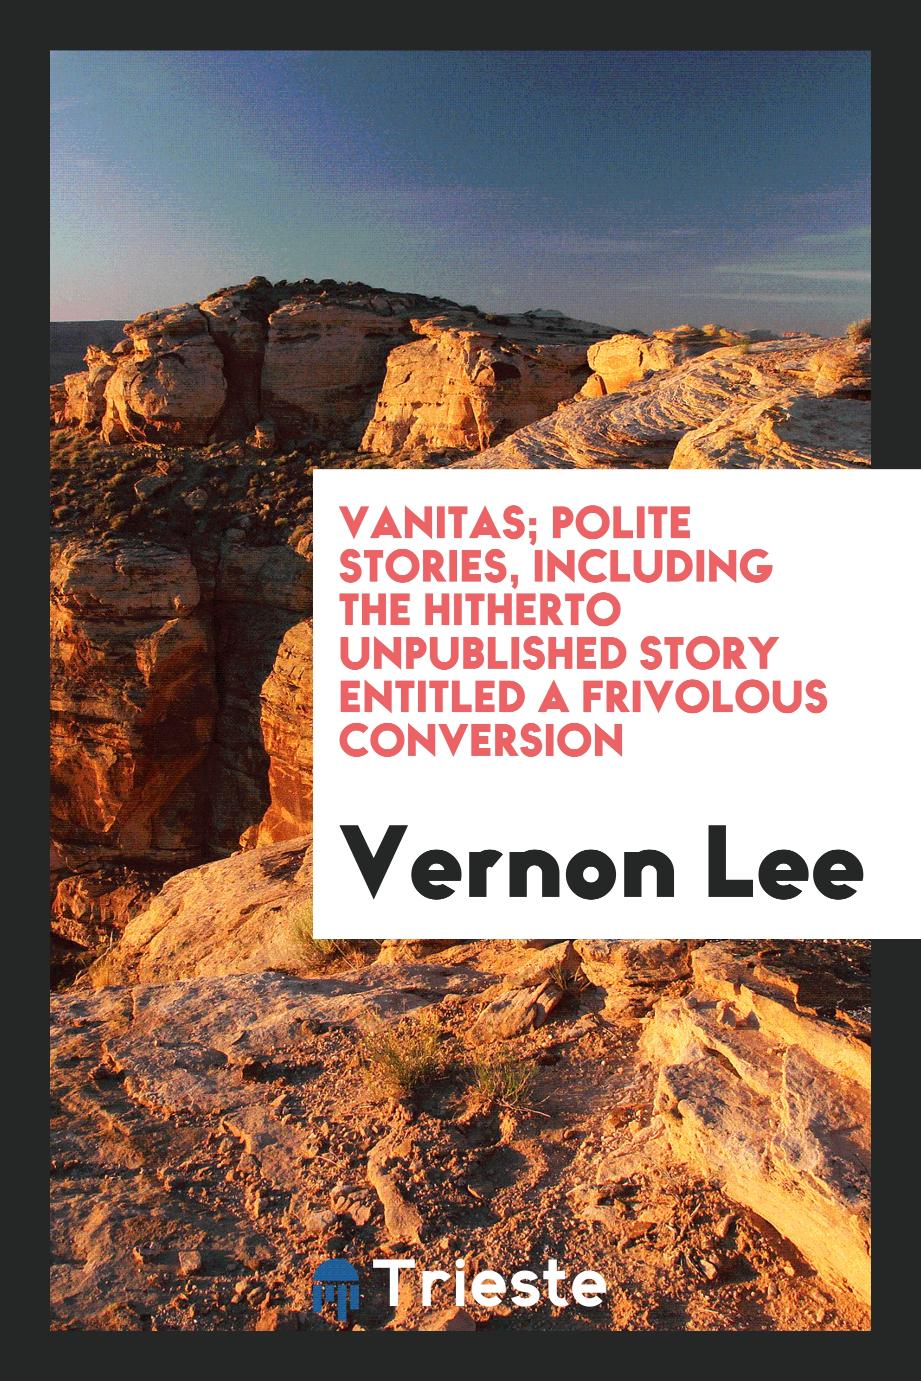 Vanitas; polite stories, including the hitherto unpublished story entitled a frivolous conversion